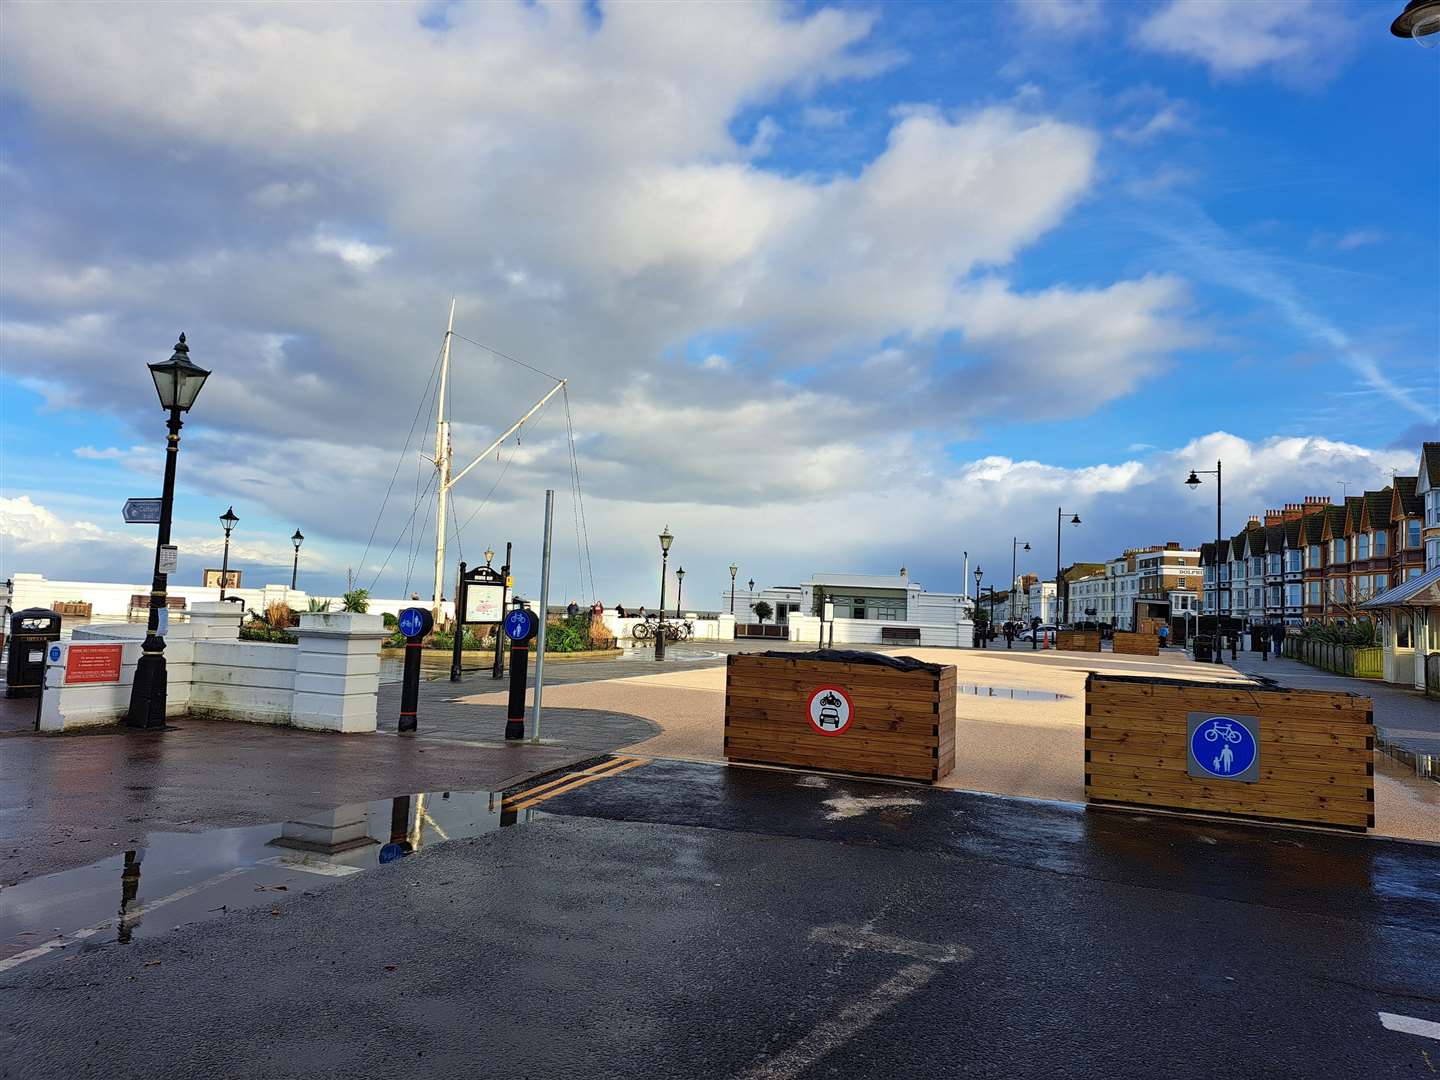 Central Parade, Herne Bay, is now blocked by planters, meaning motorists can no longer drive the full length of the seafront